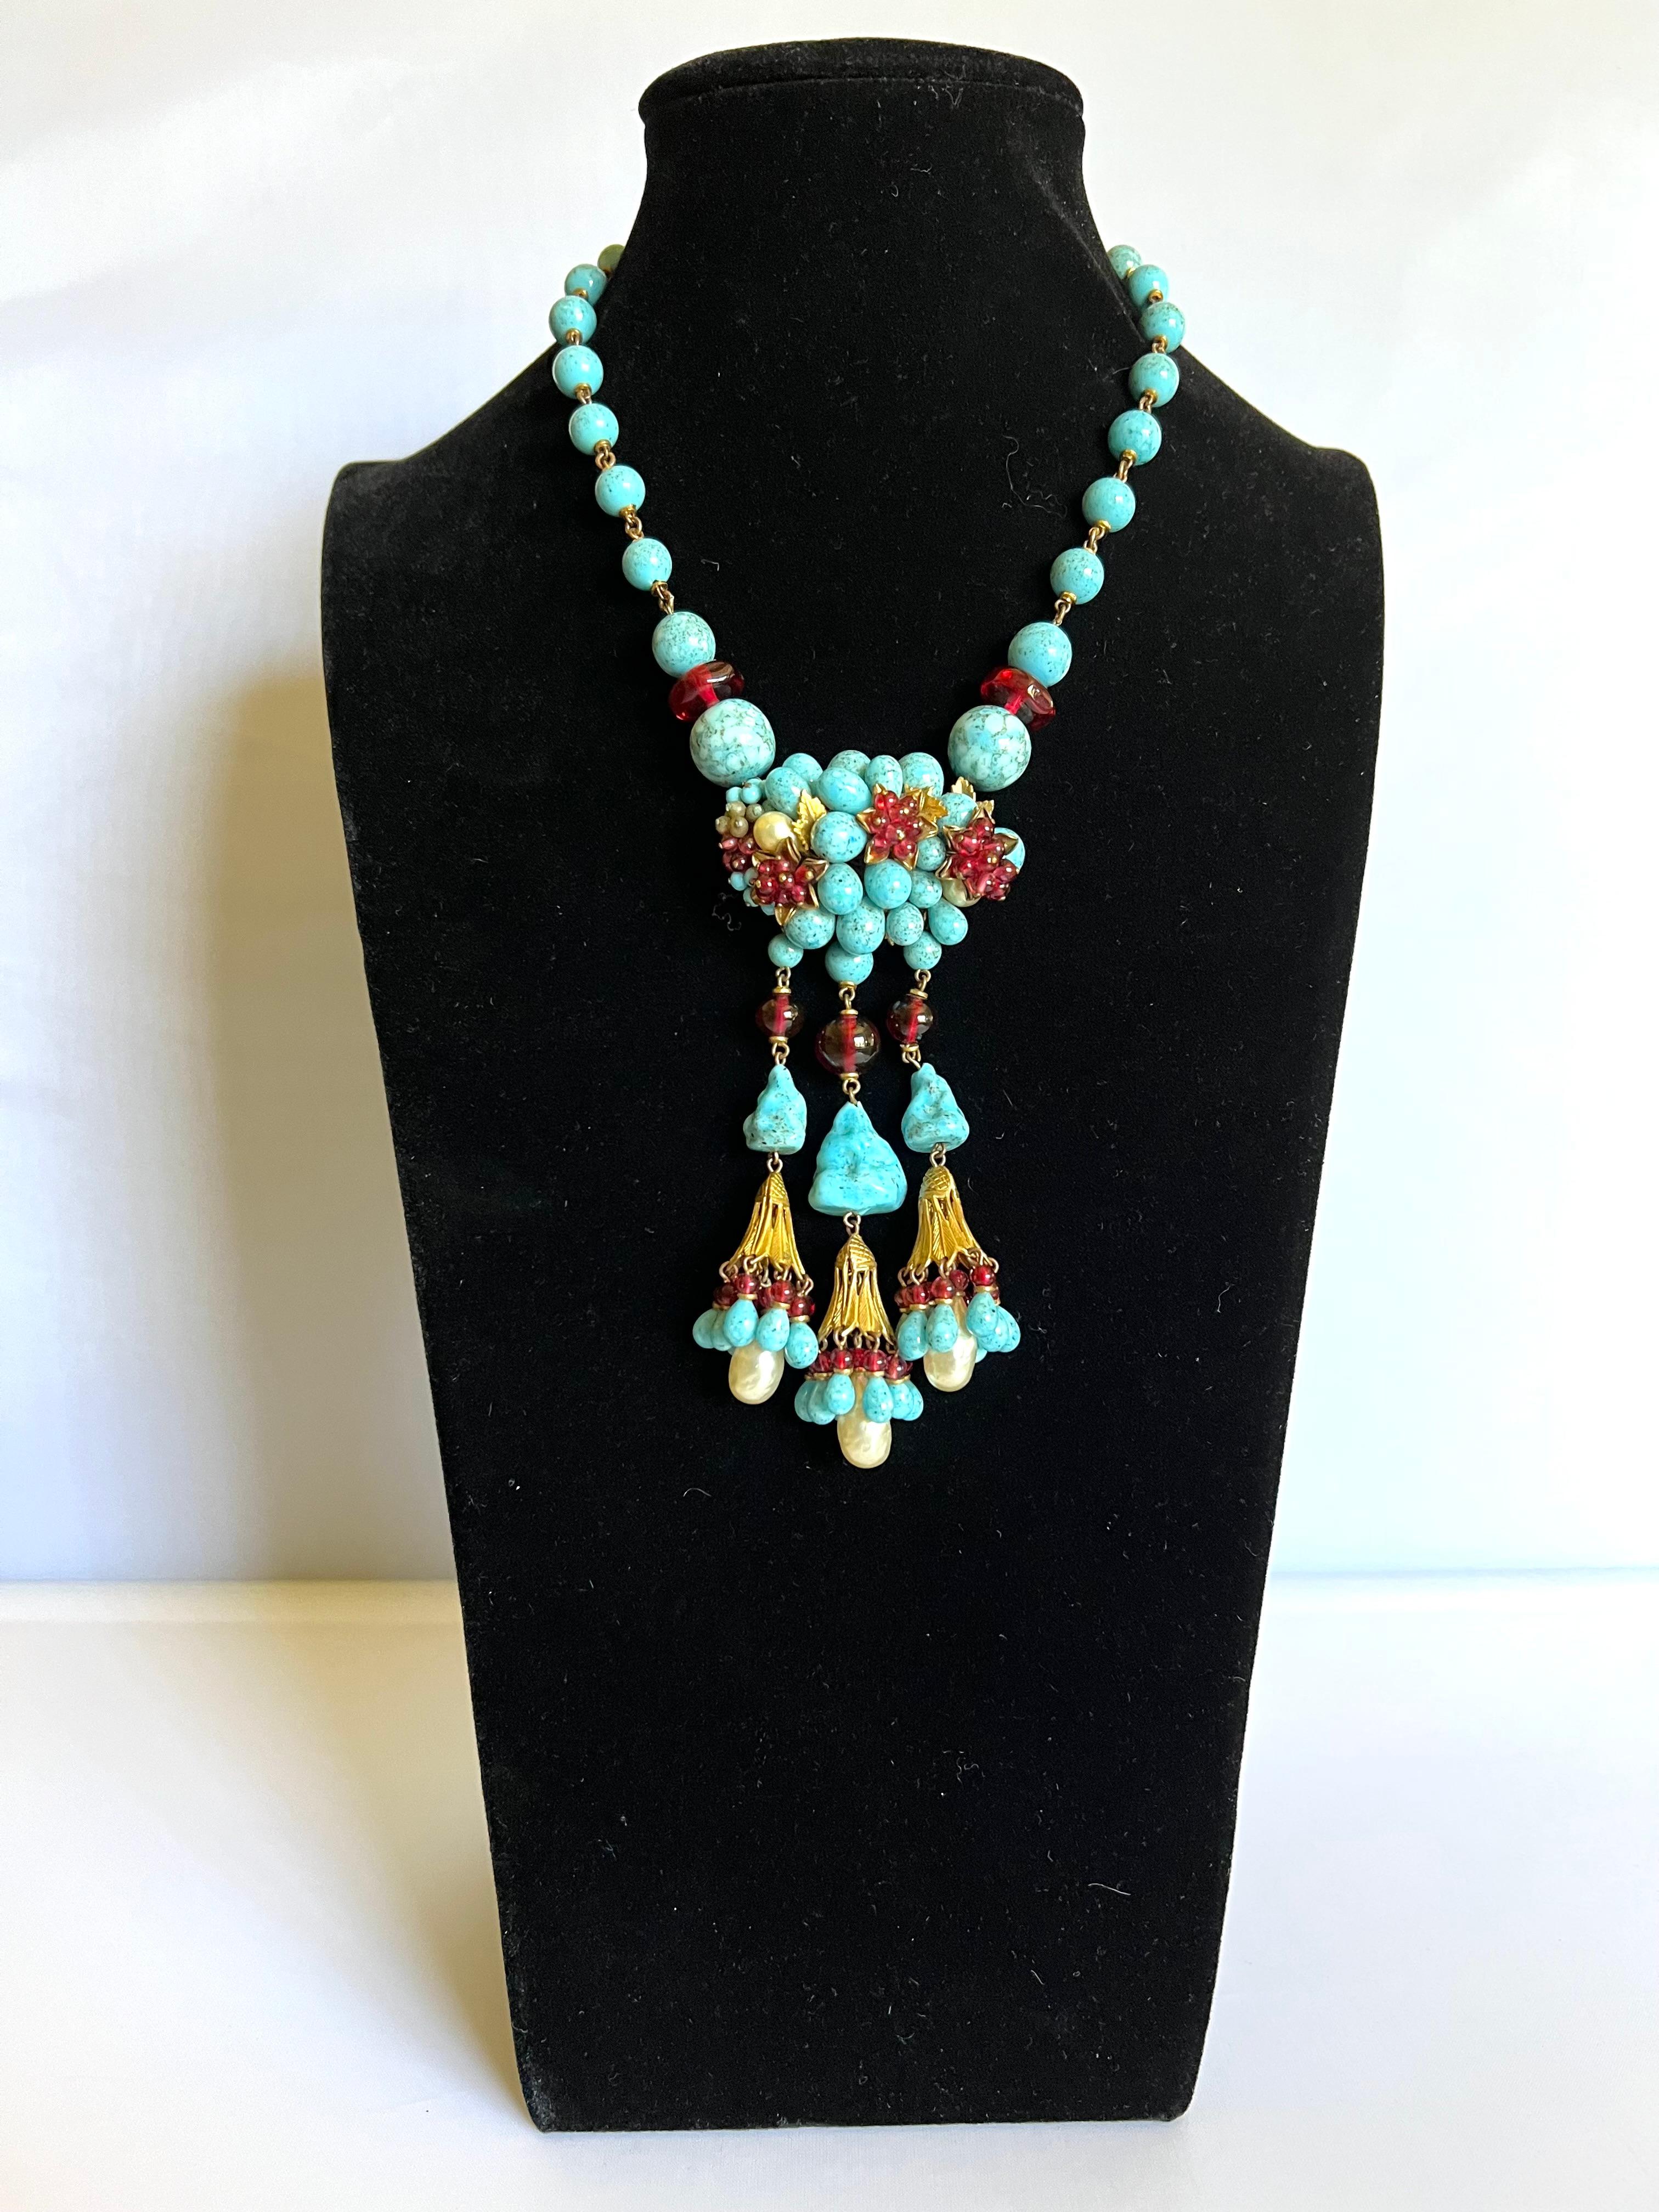 Extremely rare pre-WWII, Louis Rousselet (glass bead)(turquoise, red, and faux baroque pearls) necklace from the 1930's for Chanel Haute Couture when she was segueing from Art-Deco to Byzantine styles. Made in France.